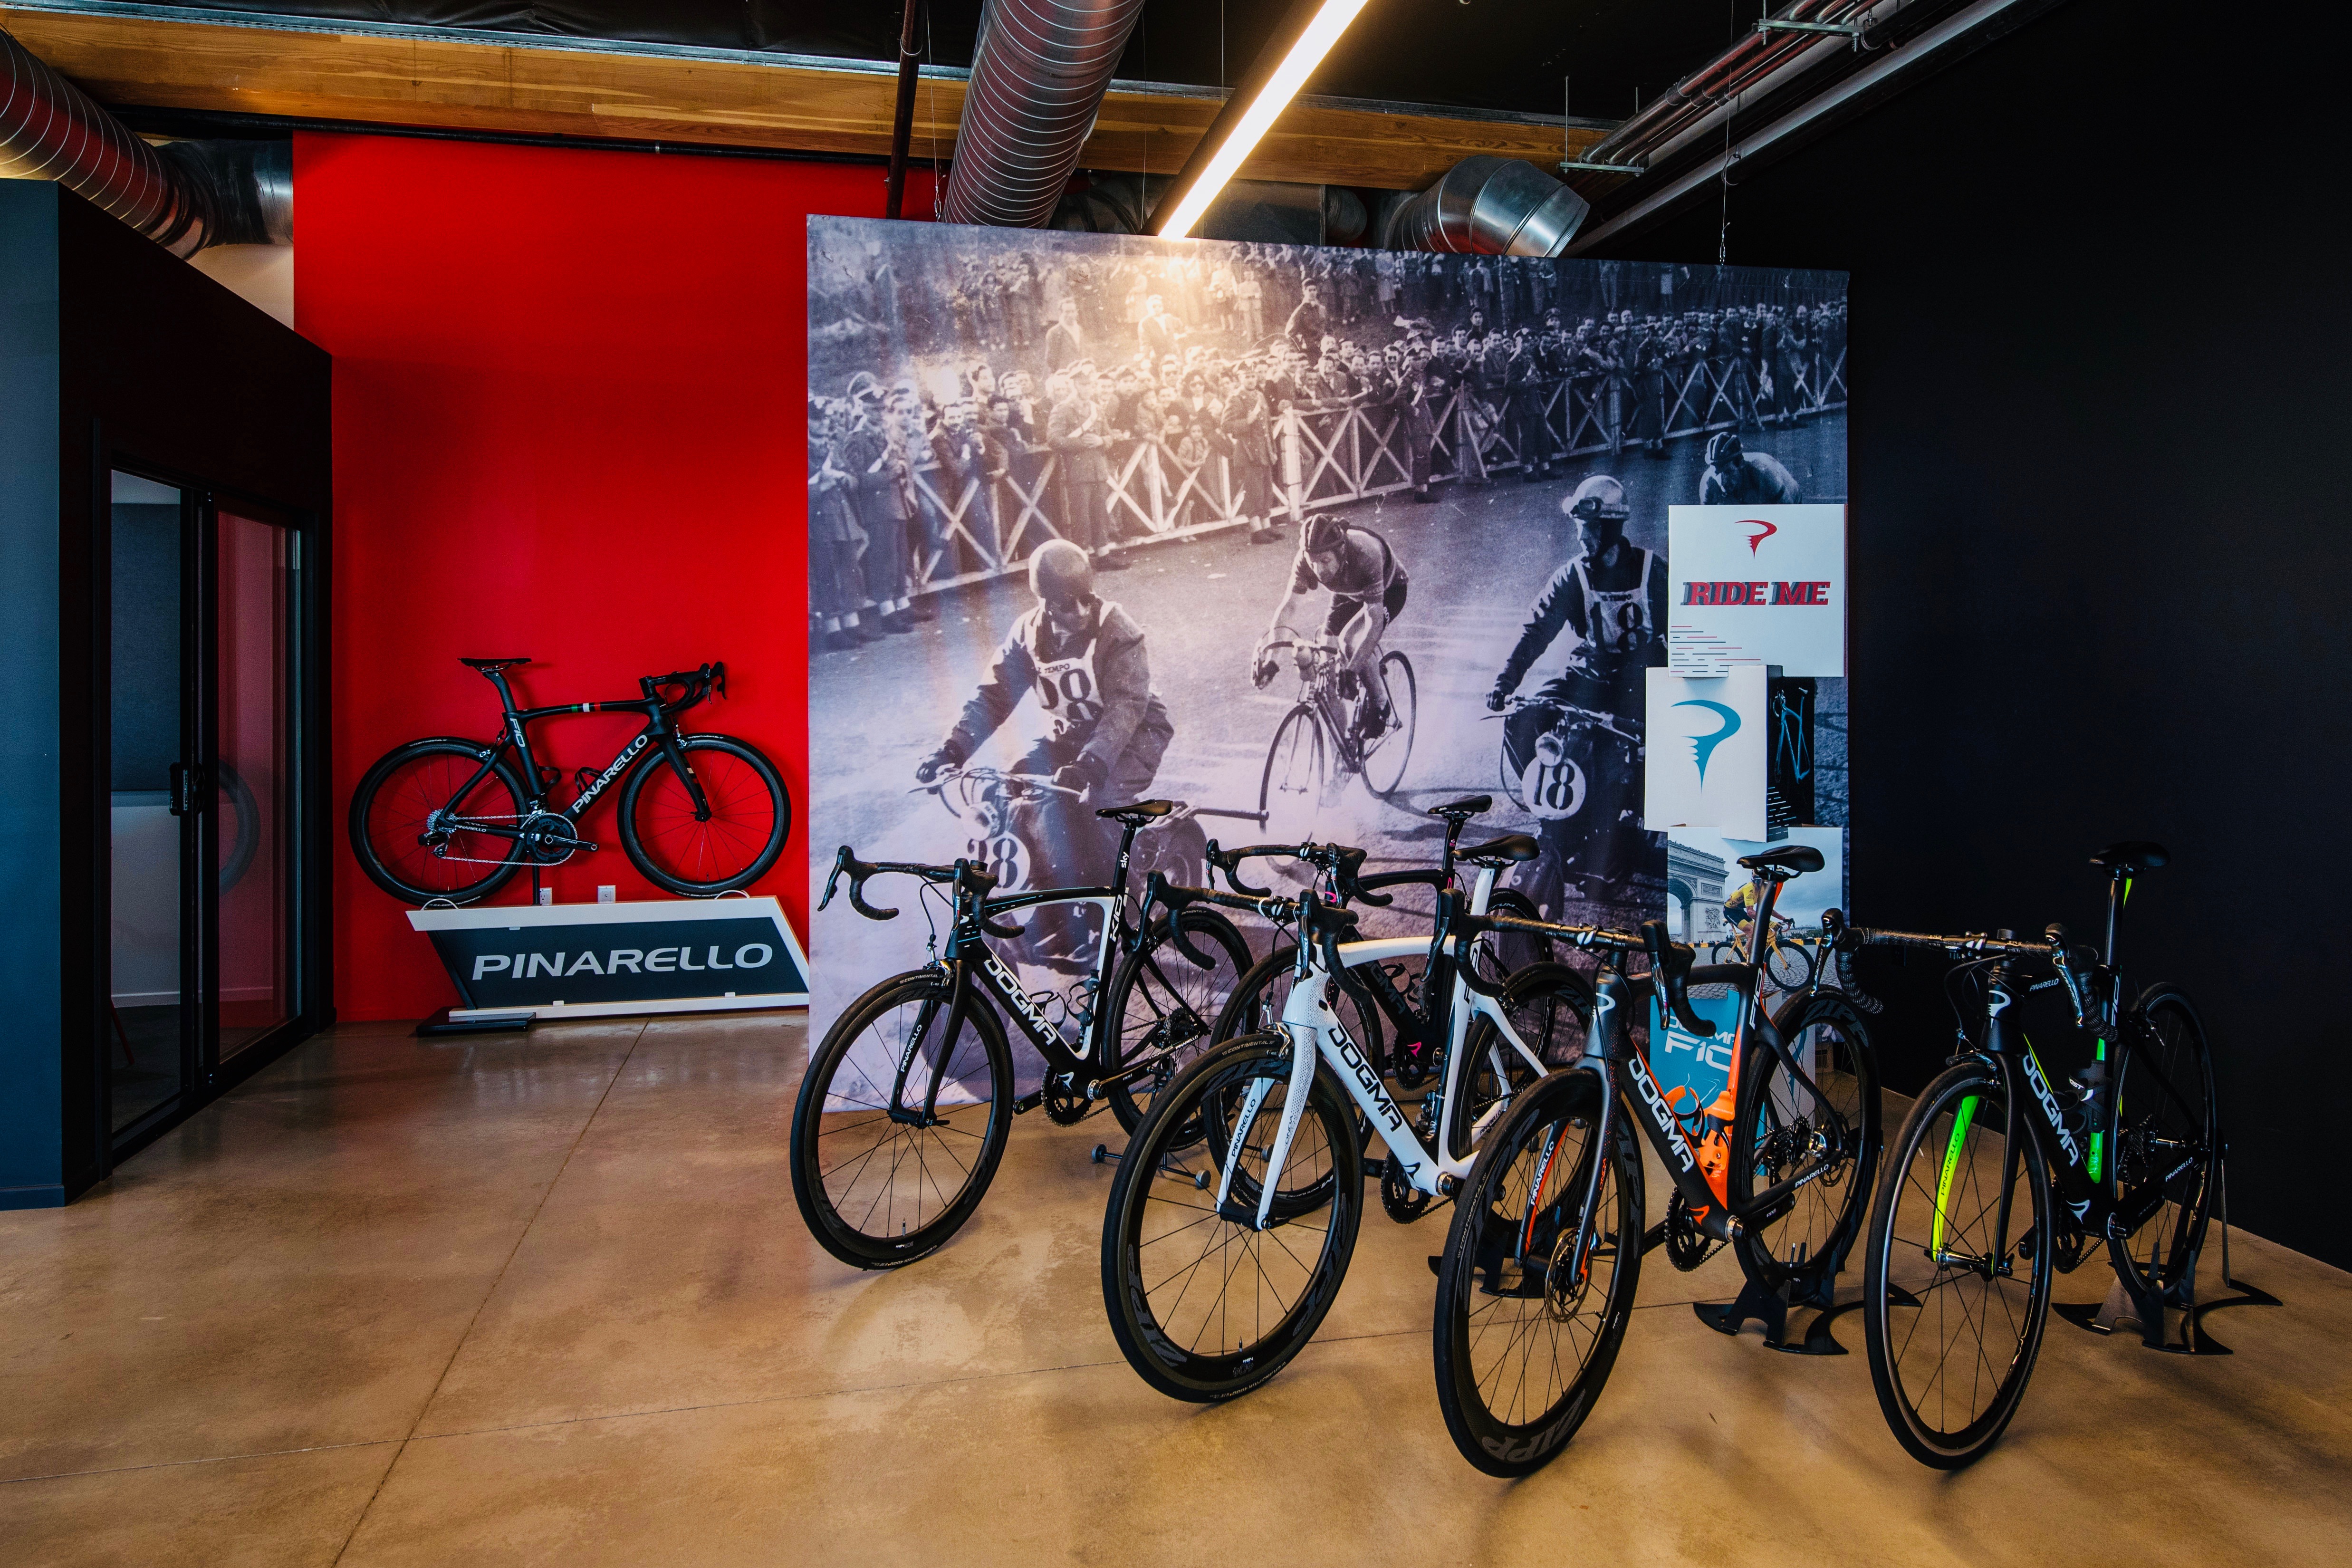 Bikes in front of red accent wall